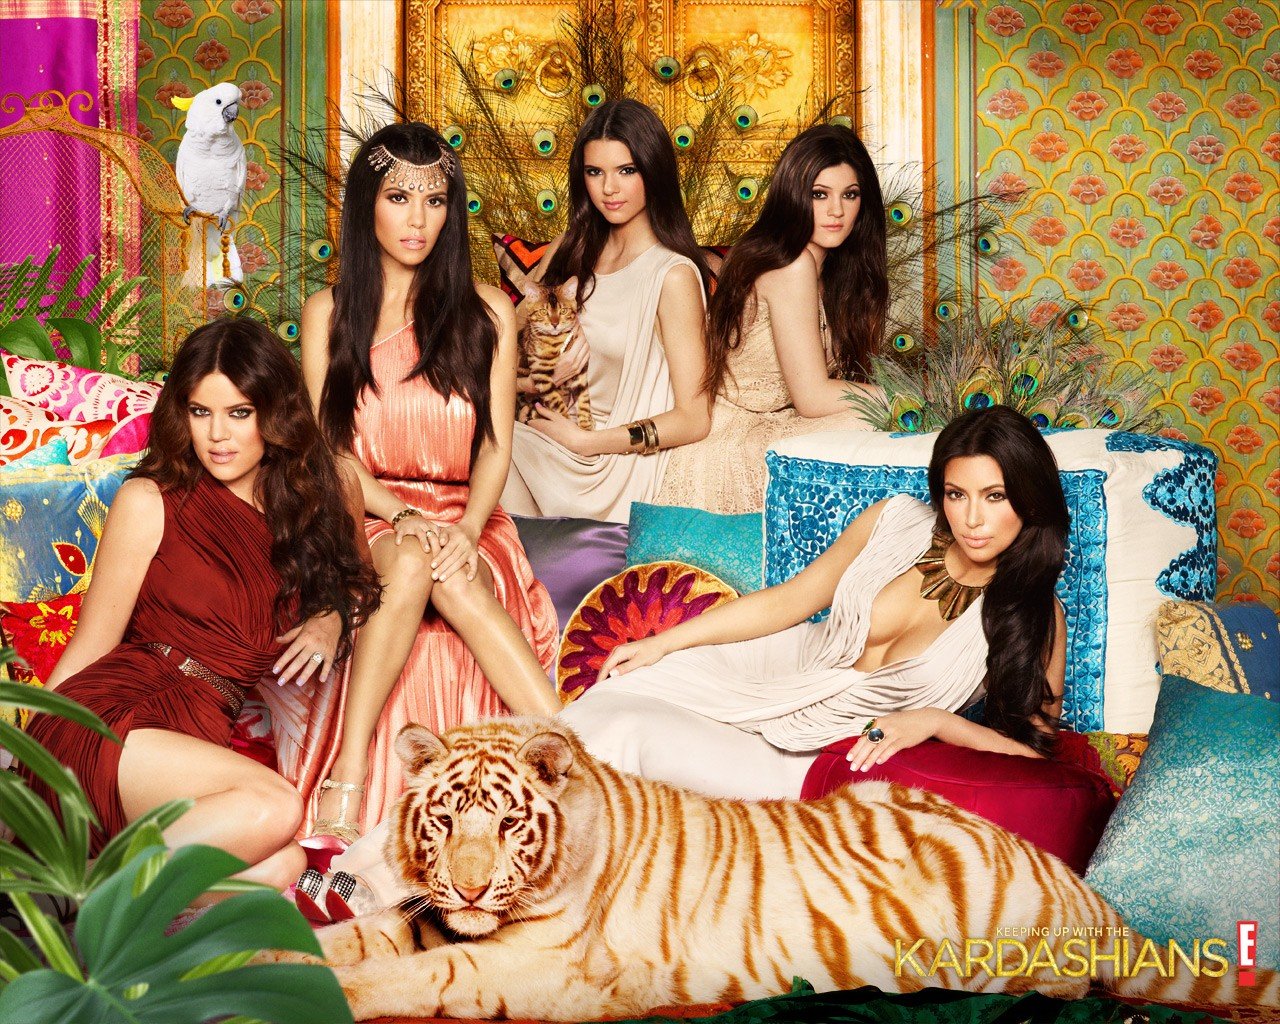 Keeping Up With The Kardashians Wallpapers